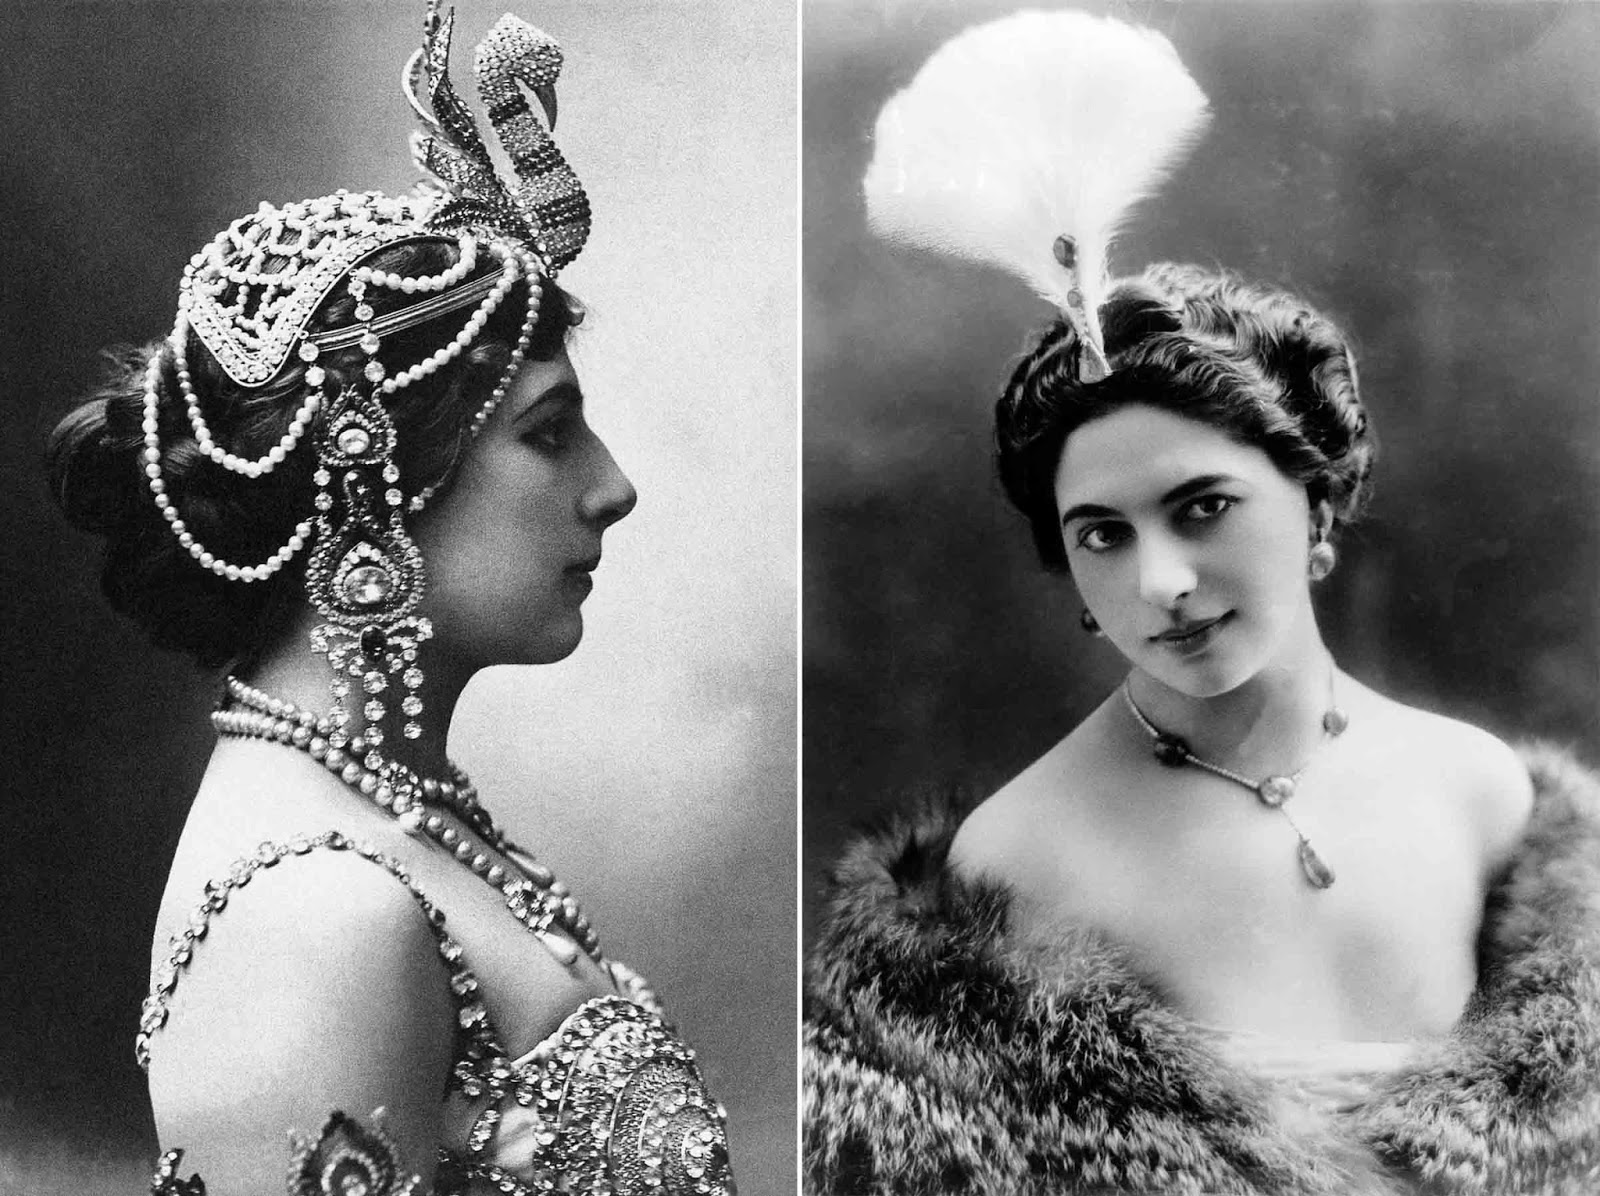 what was the real name and nationality of mata hari the german spy during world war i